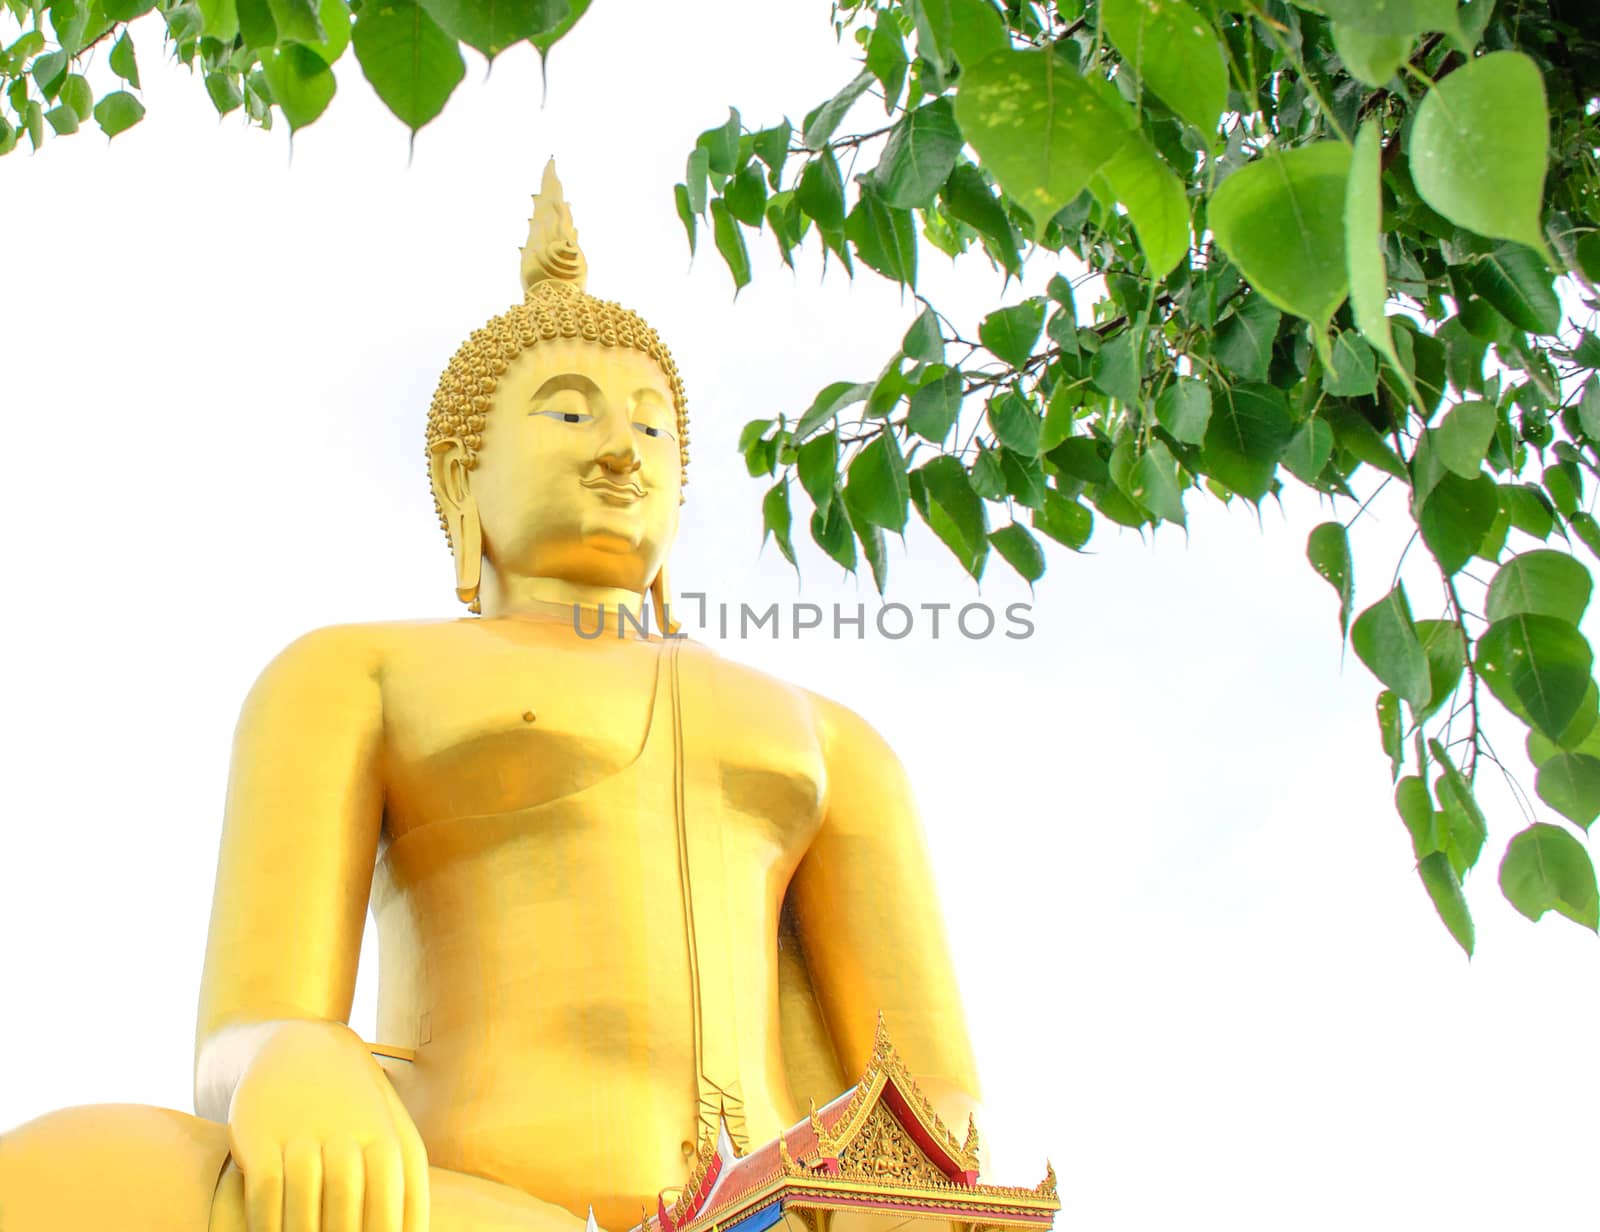 The Golden Seated Buddha Image and Pipal leaf on White Background.